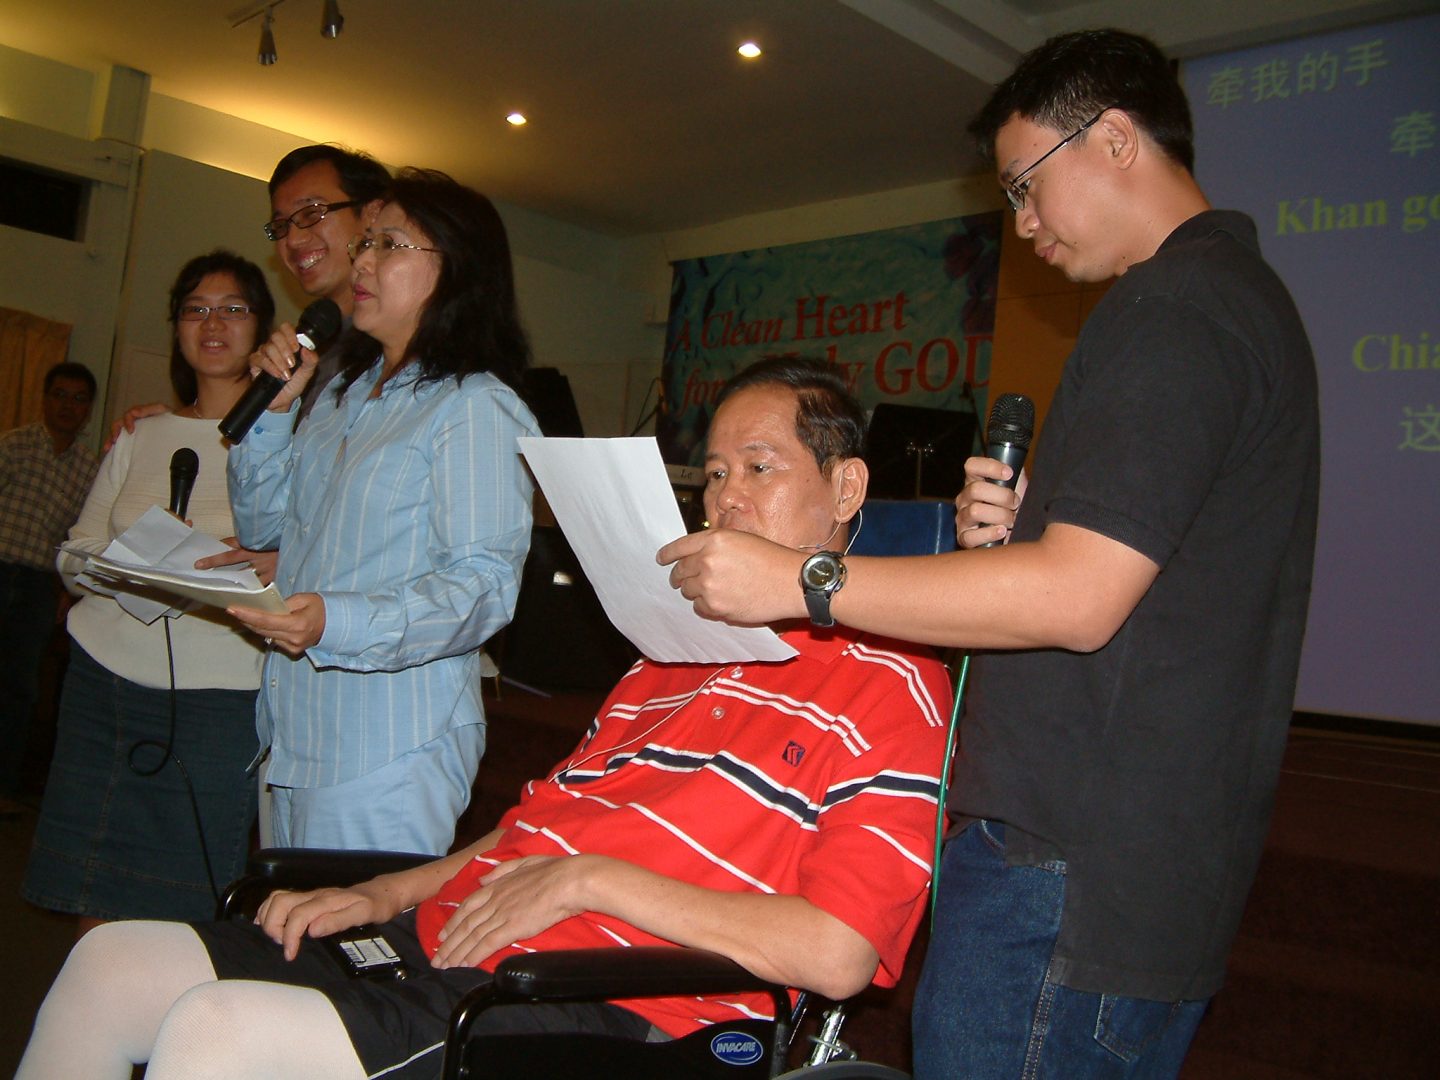 Ps Ling's father (in orange) readily testified to God's goodness and faithfulness by sharing his testimony at various churches. Photo courtesy of Ling Kin Lew.